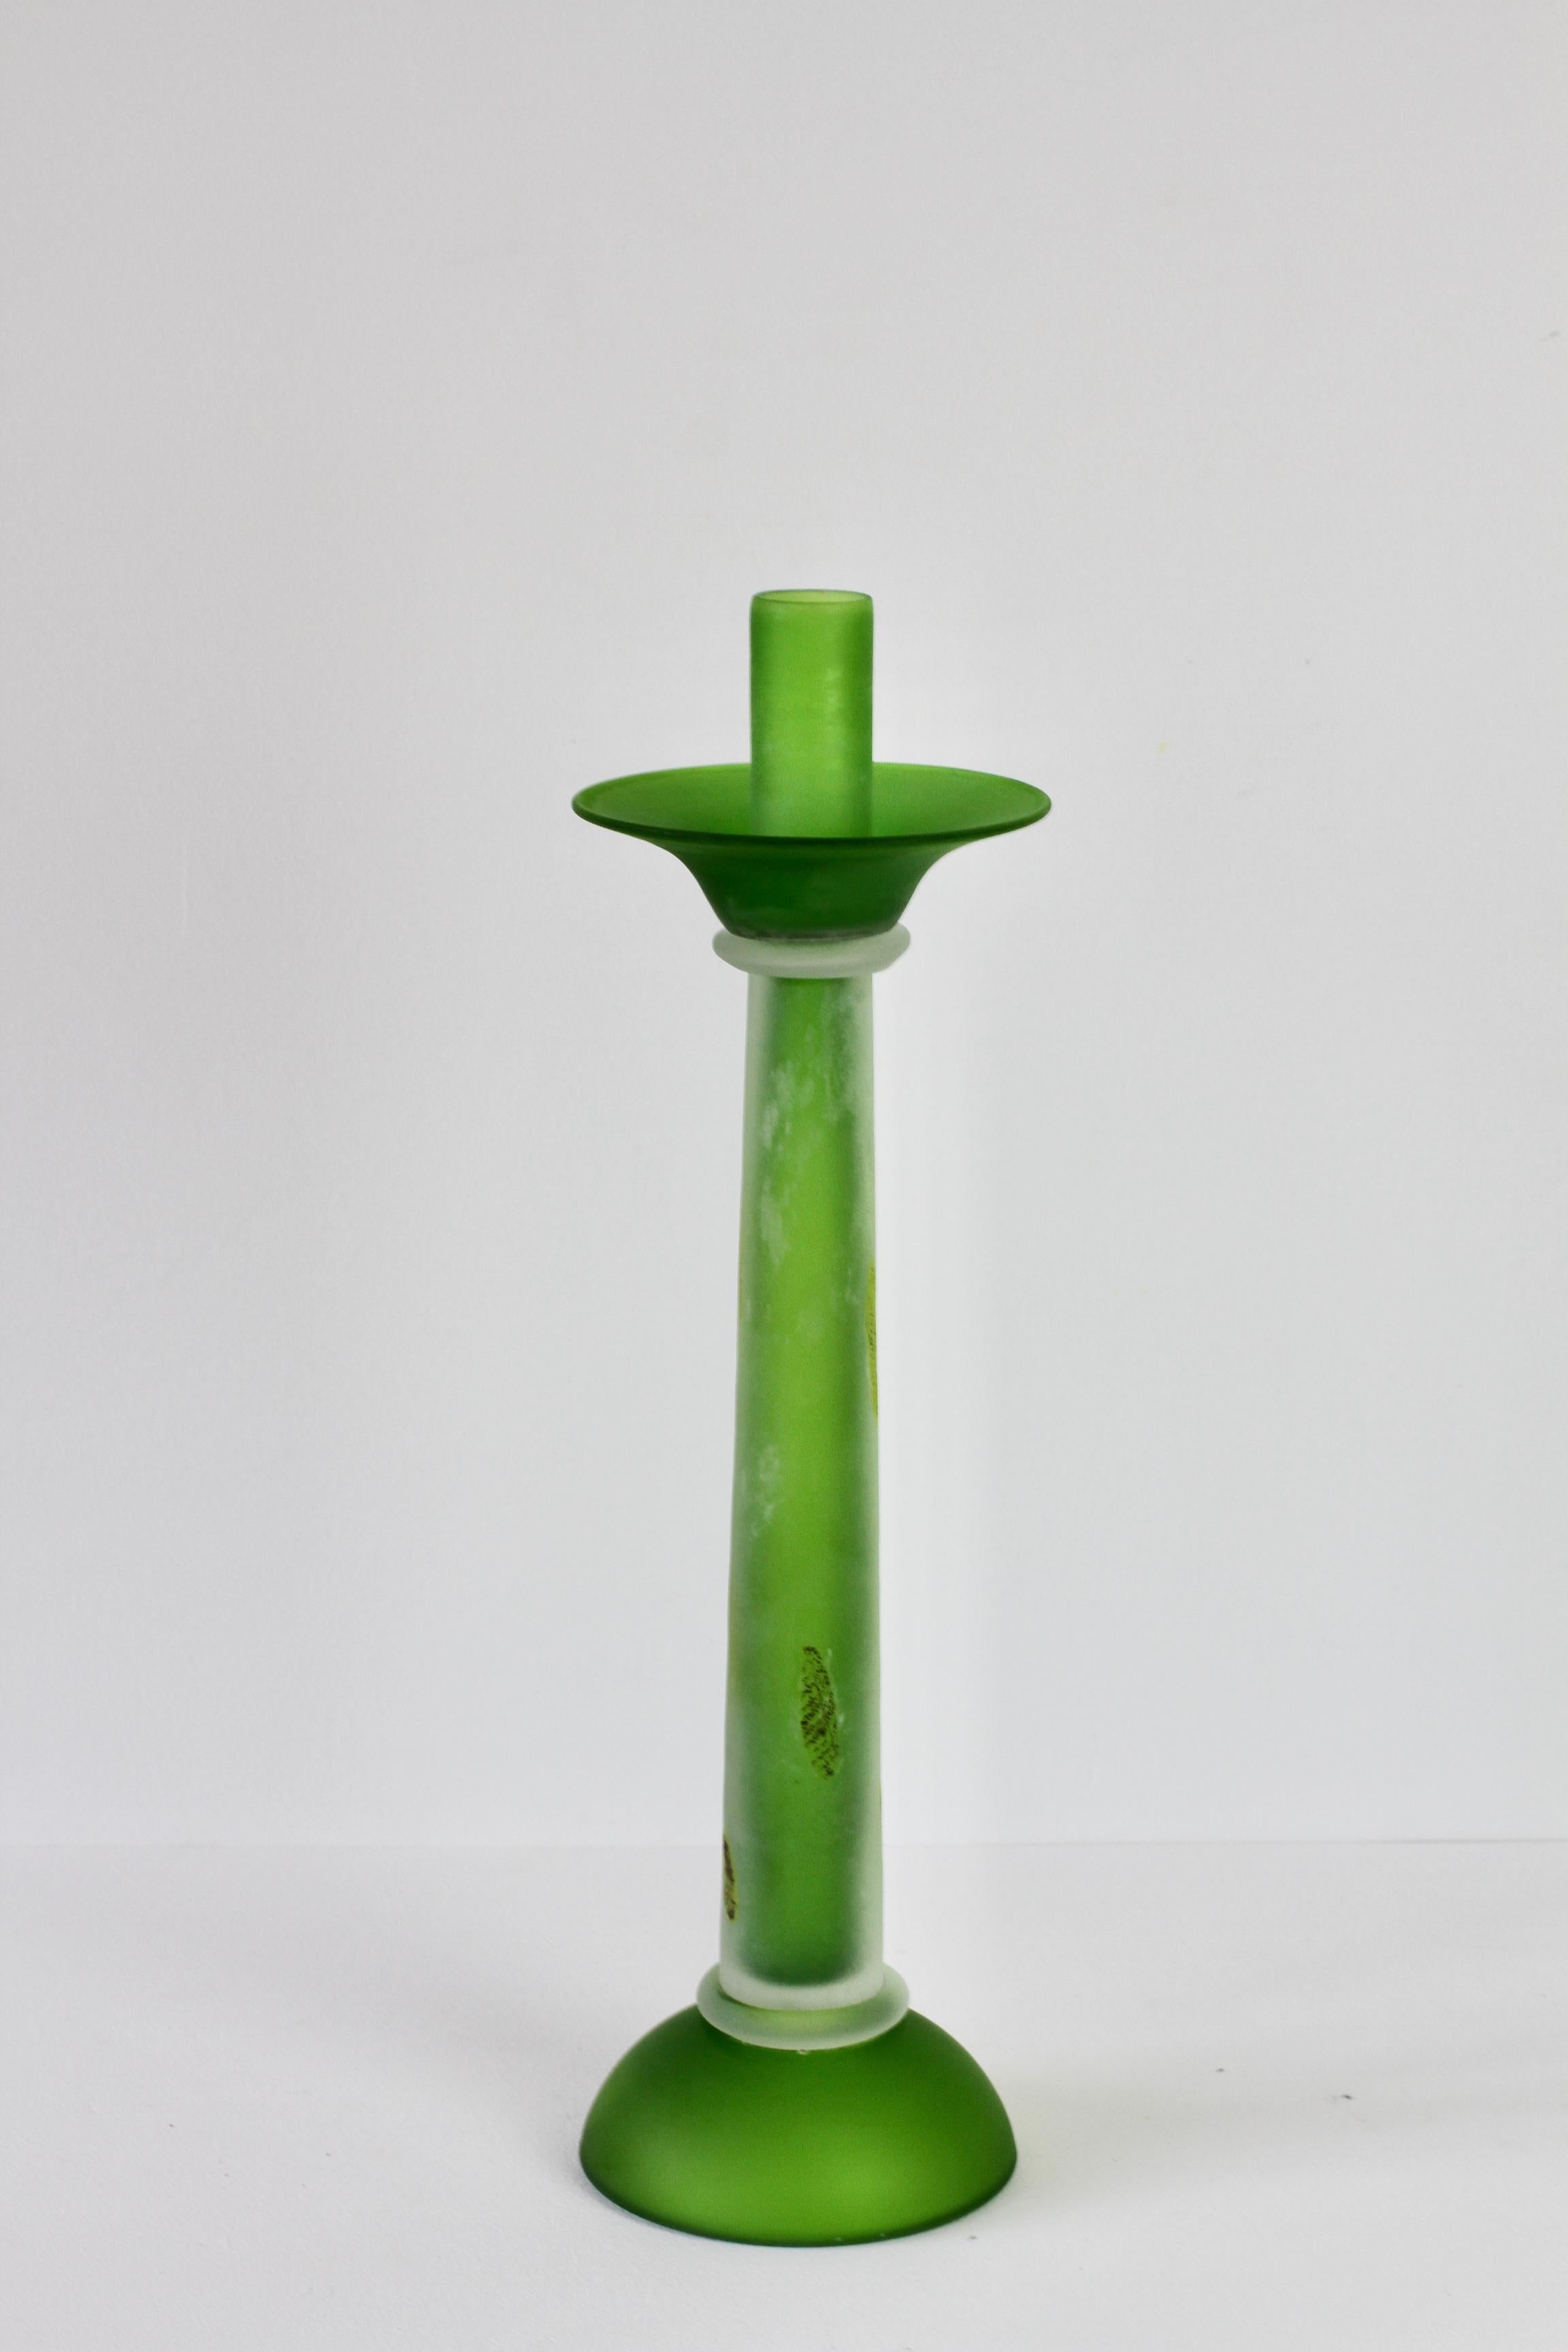 Monumental, tall and huge green colored (coloured) vintage Italian Murano glass candlestick holder by Cenedese. Beautiful craftsmanship and stunning bright green color with a clear glass details which appears to either have the 'scavo' finish or has